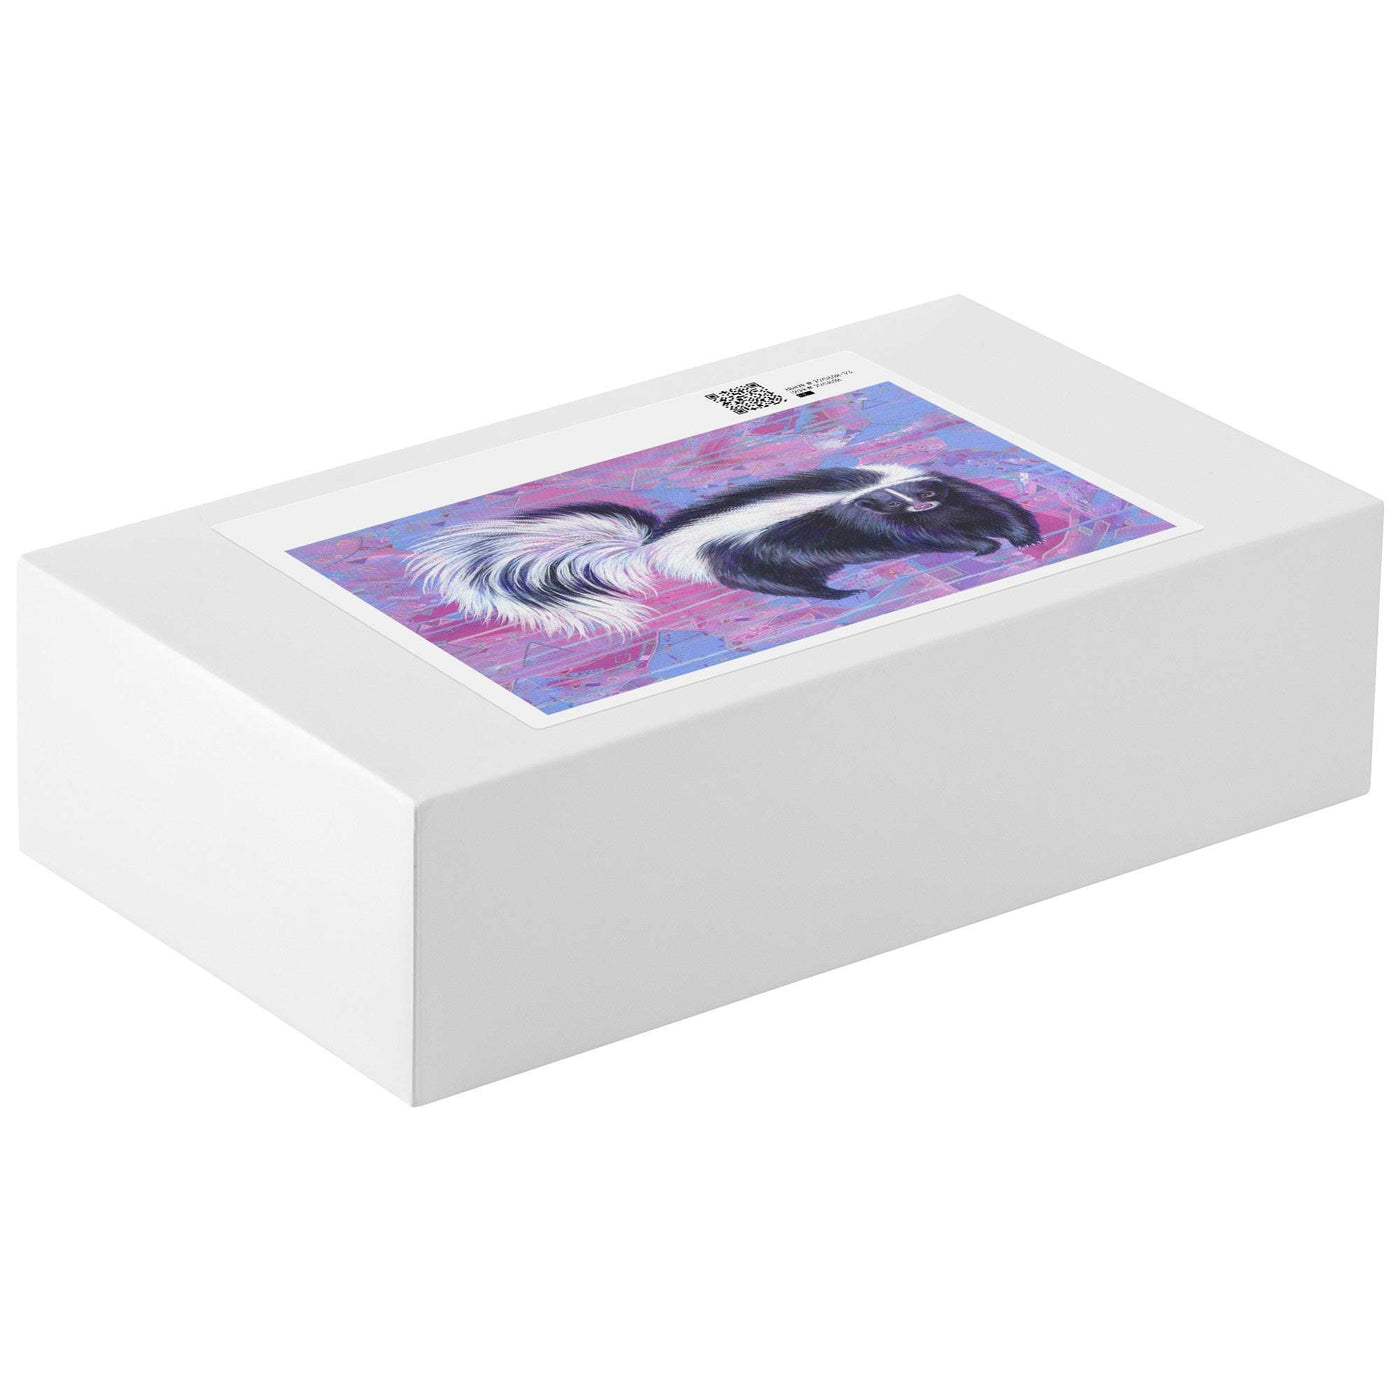 A closed white Skunk Puzzle box showcasing a colored abstract painting of a skunk on its lid. The box sits against a white background.